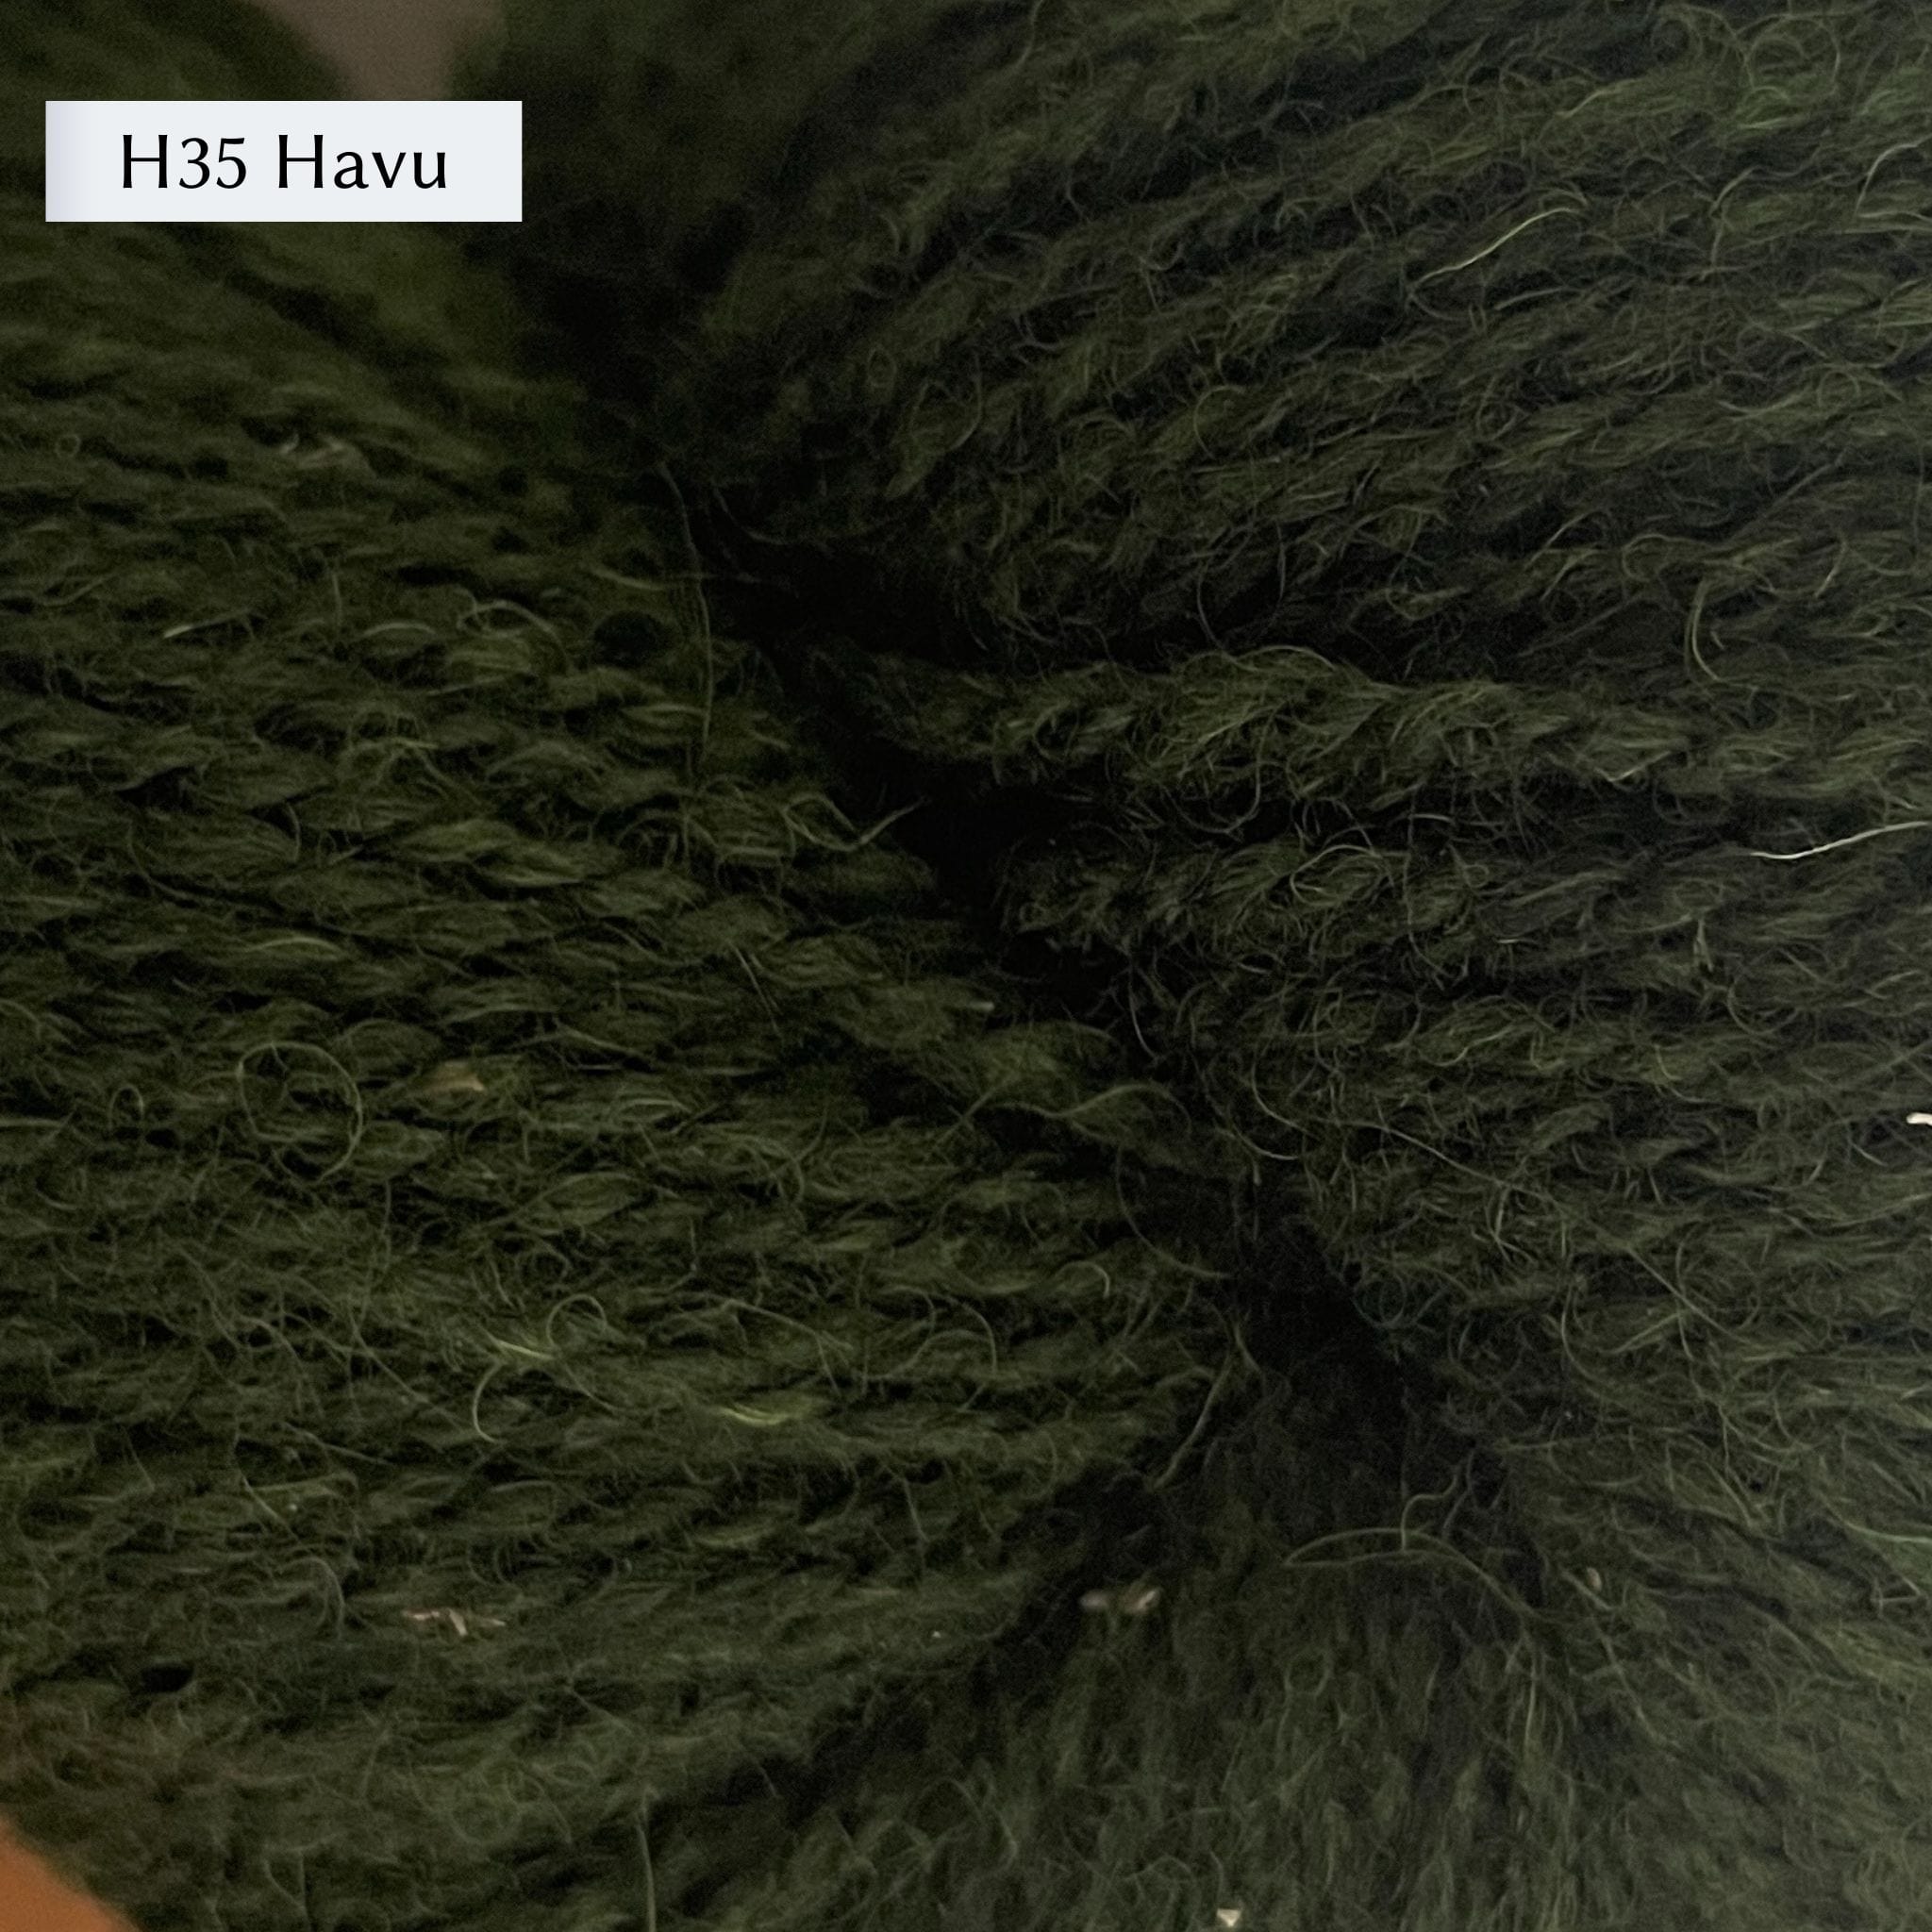 Tukuwool DK Yarn, 100% Finnish Wool shown in colorway H35 Havu which is a heathered dark green color. 